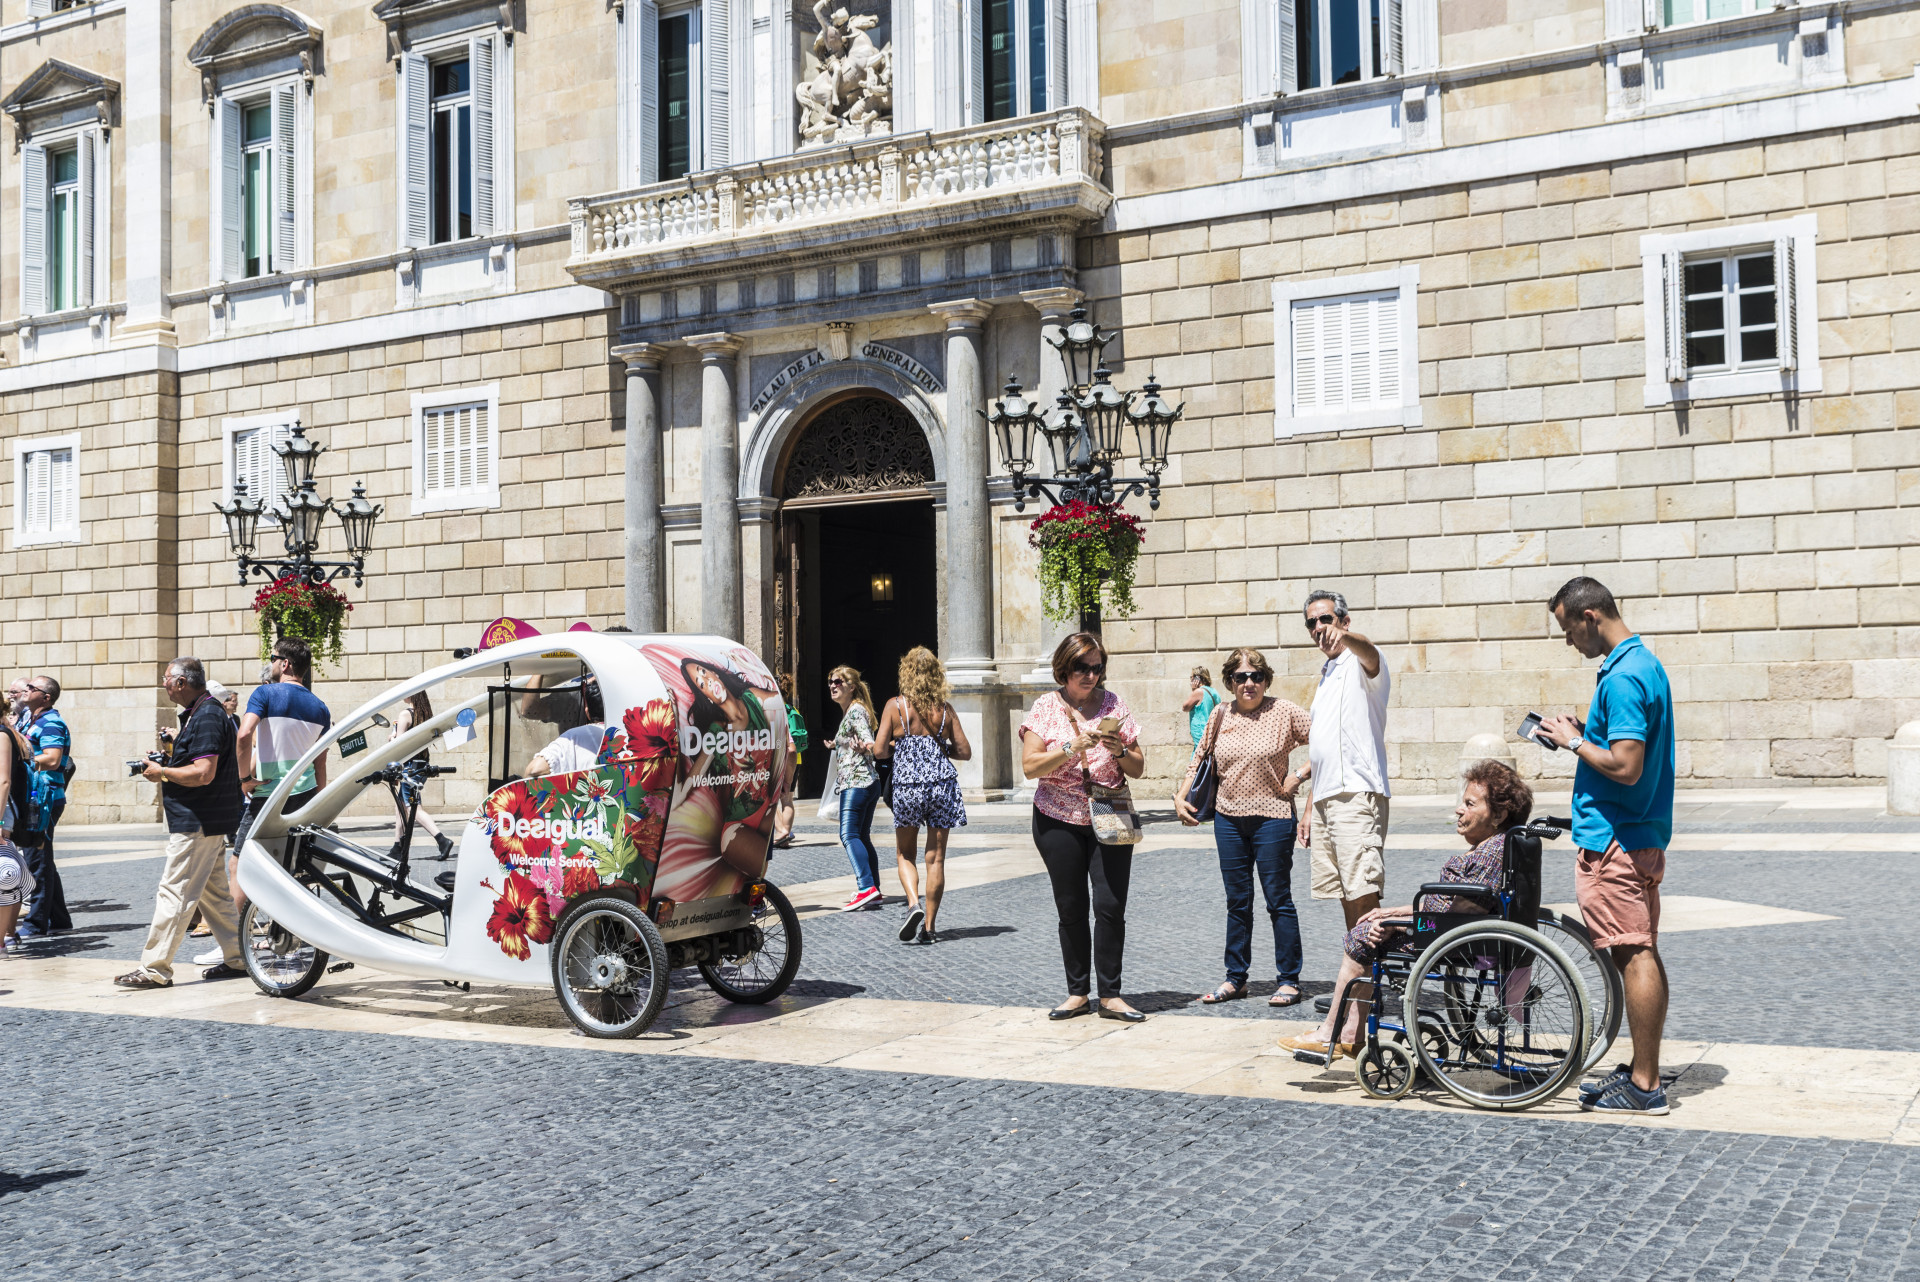 As well as flat streets and adapted public transport, tourist attractions are also fairly accessible for those with mobility restrictions.<p>You may also like:<a href="https://www.starsinsider.com/n/415364?utm_source=msn.com&utm_medium=display&utm_campaign=referral_description&utm_content=550448en-us"> The controversial Sultan of Brunei, the current longest-ruling monarch in the world</a></p>